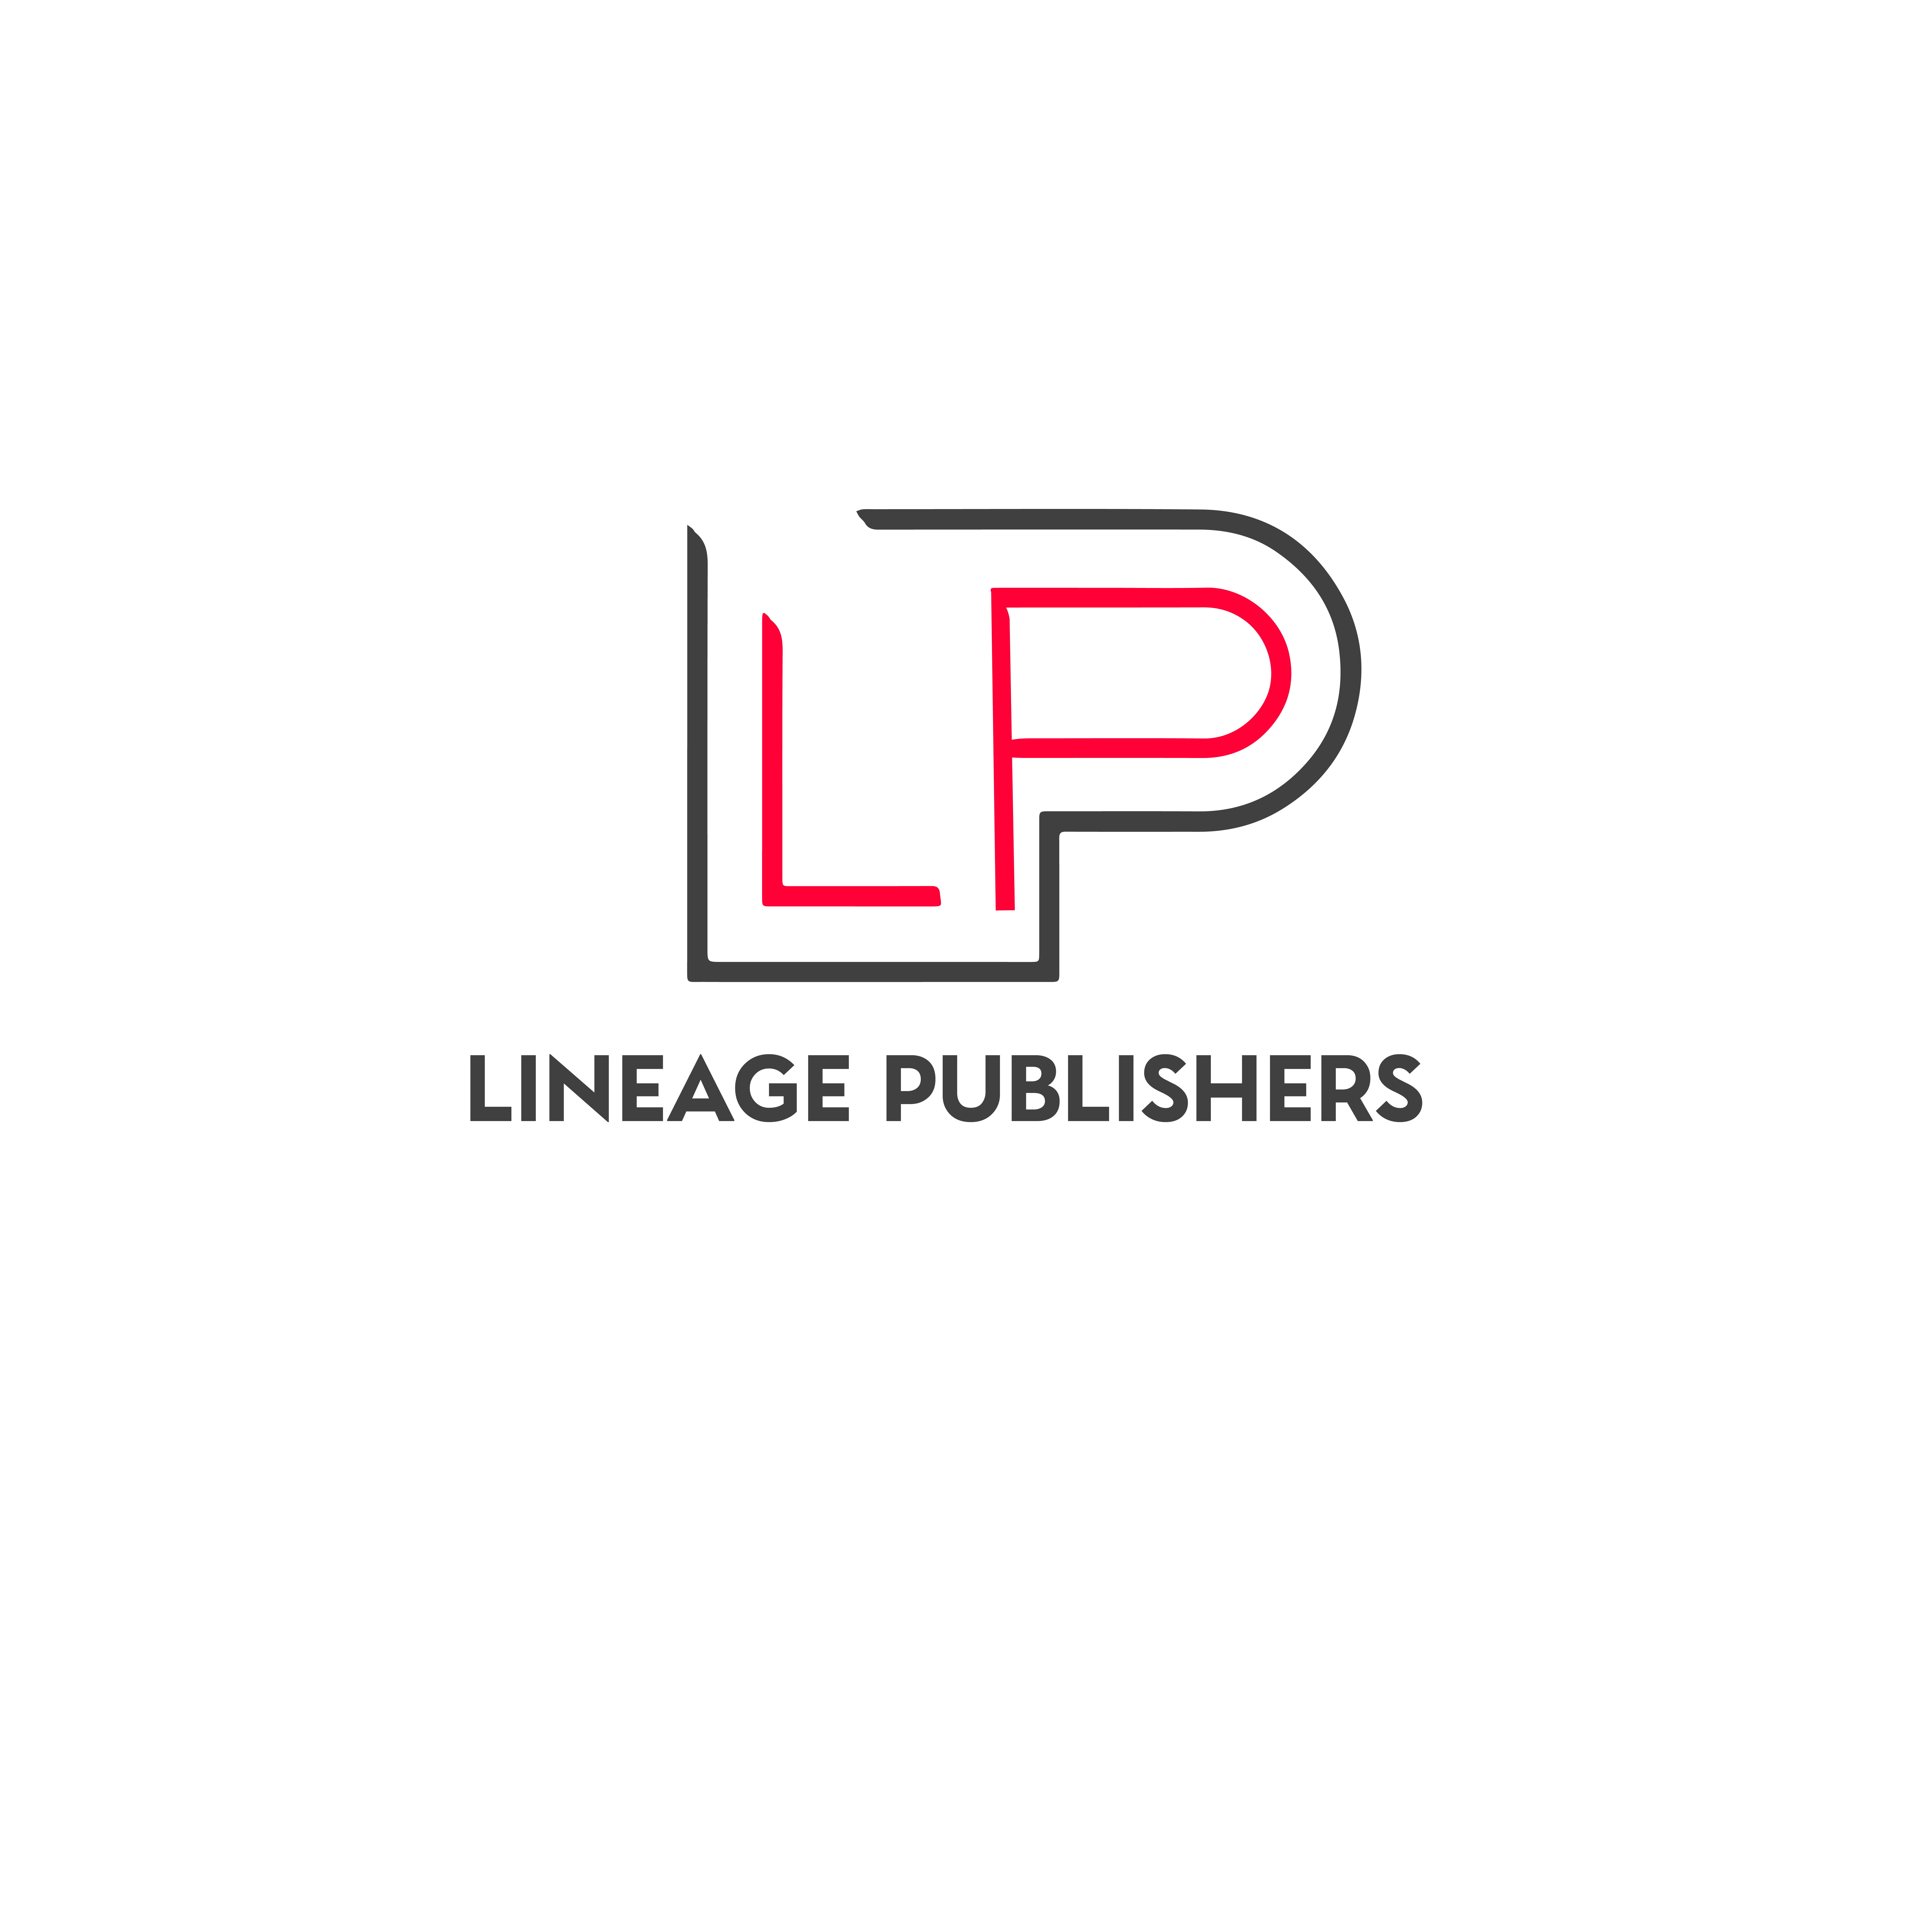 Business logo of Lineage Publishers